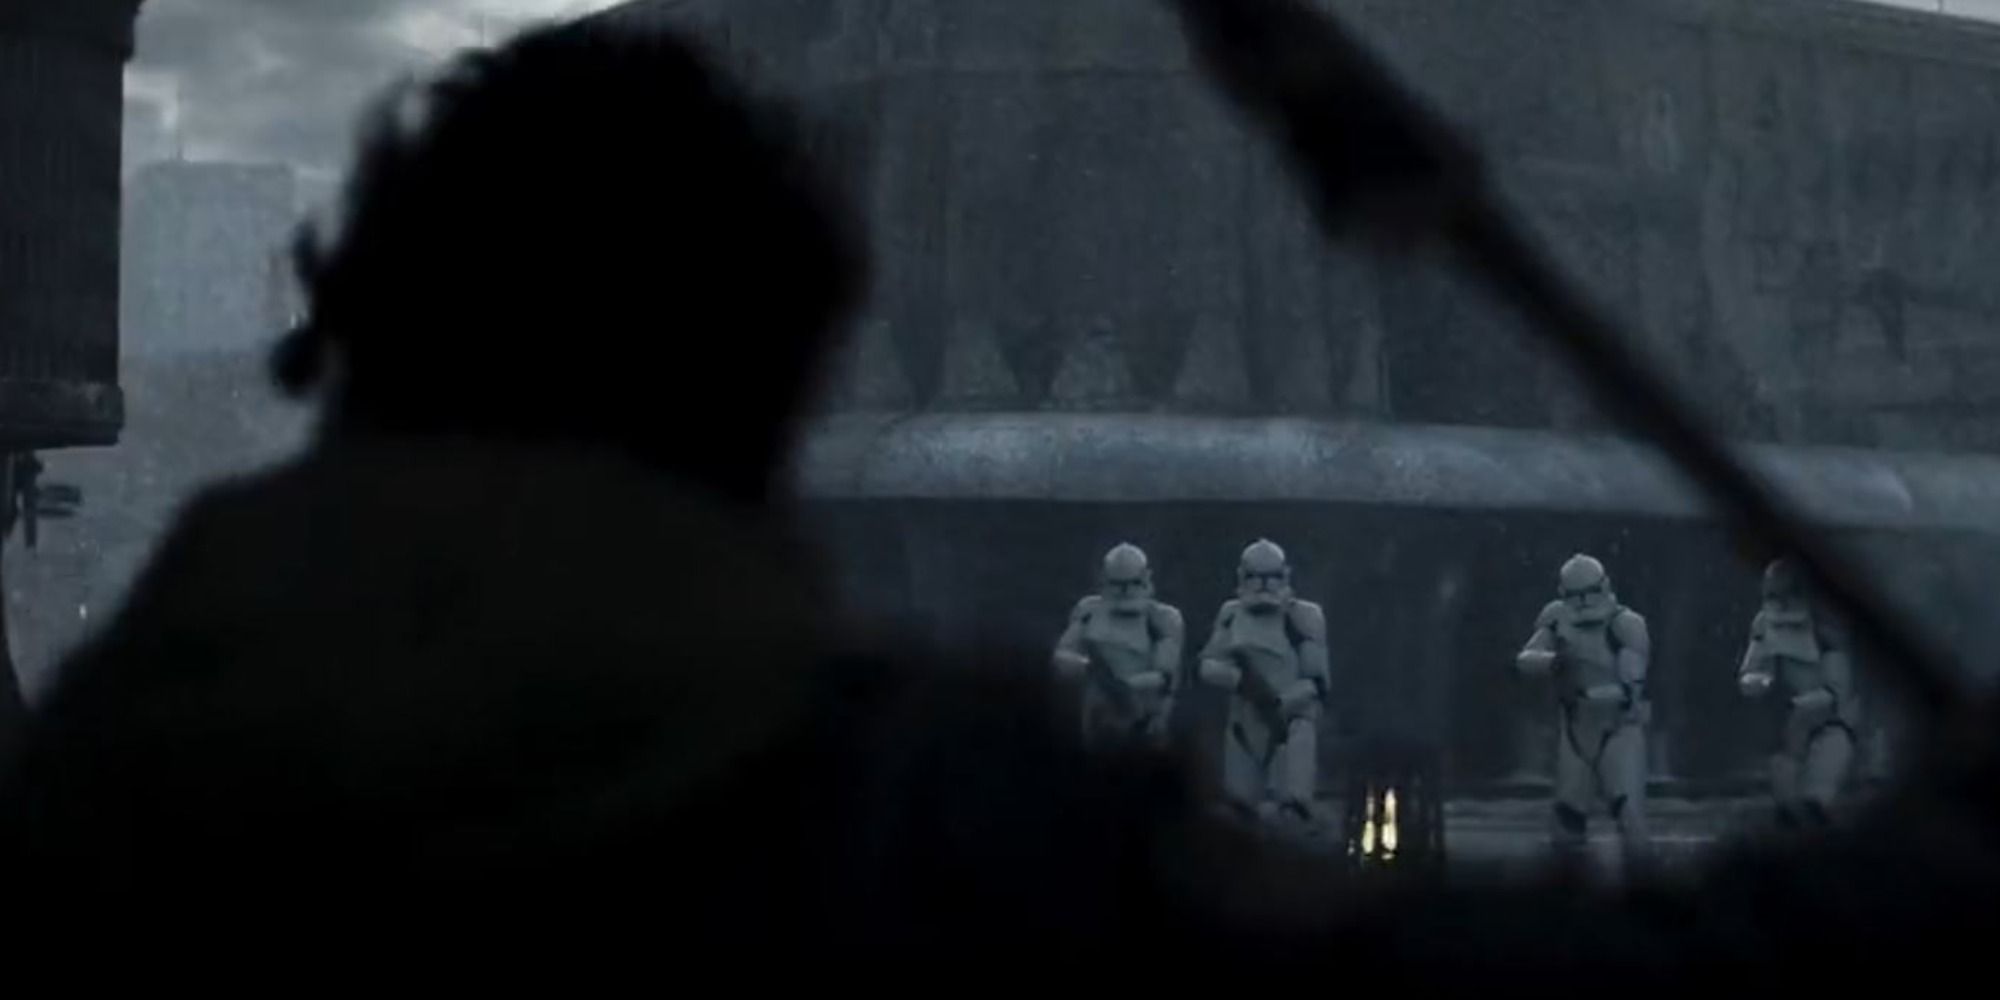 Phase 2 Clone Troopers attack in Andor trailer.